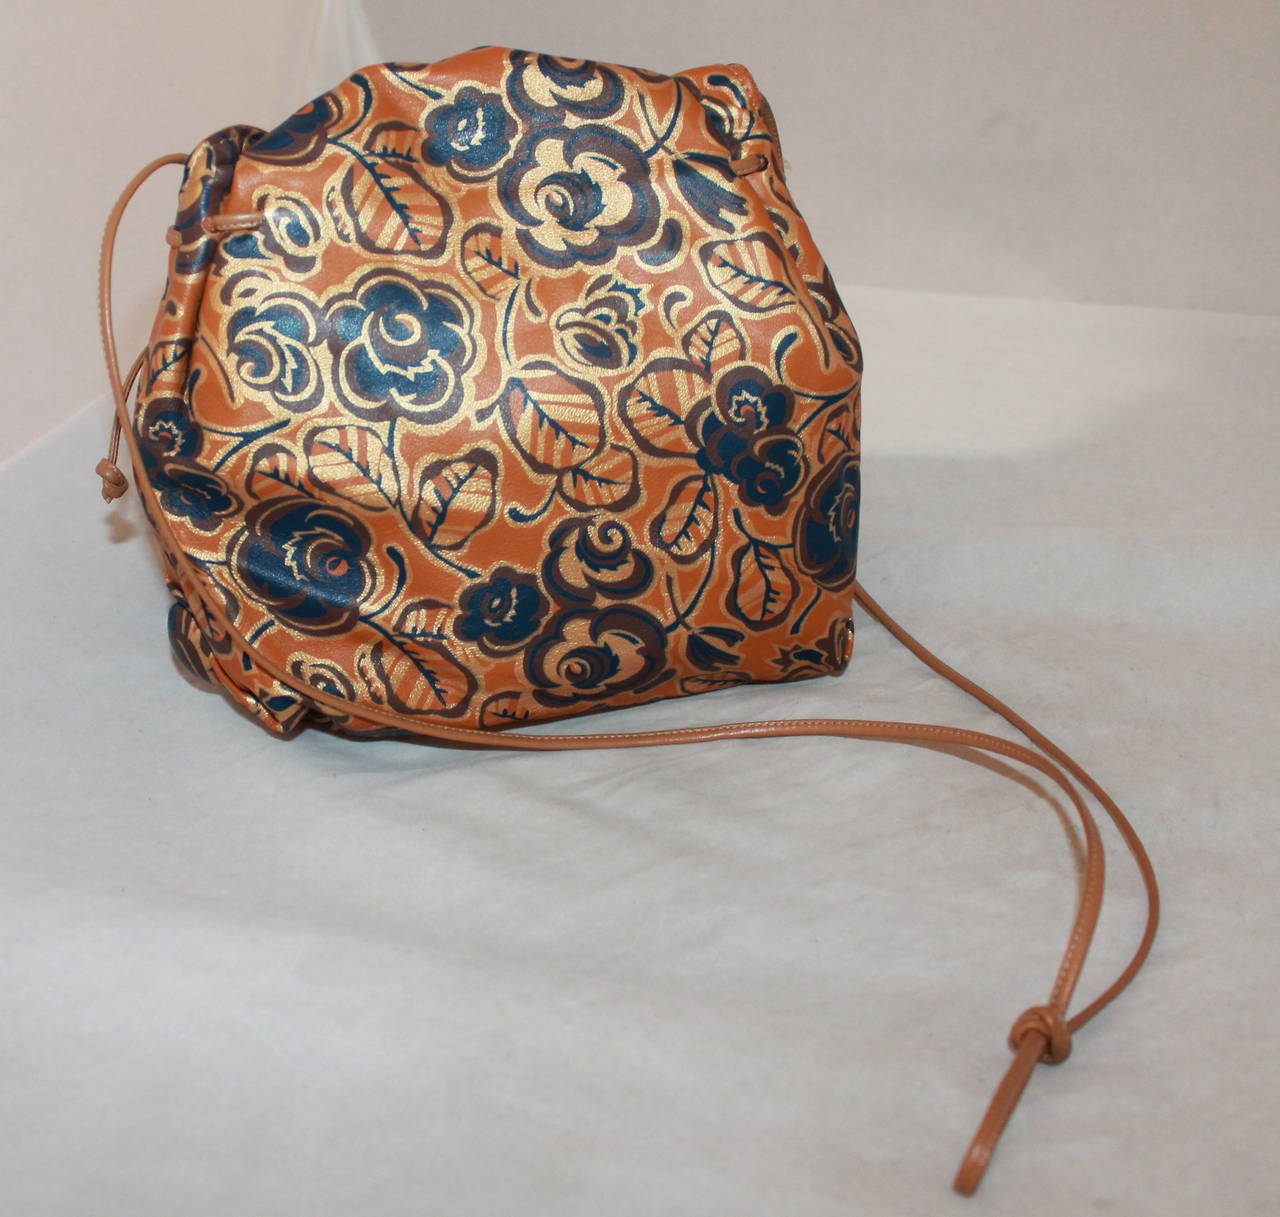 Carlos Falchi 1970's Camel Floral Print Leather Crossbody Bag. This bag is in very good condition vintage condition with wear consistent with its age. The strap can be adjusted by tying the knot higher and lower.

Measurements:
Length-